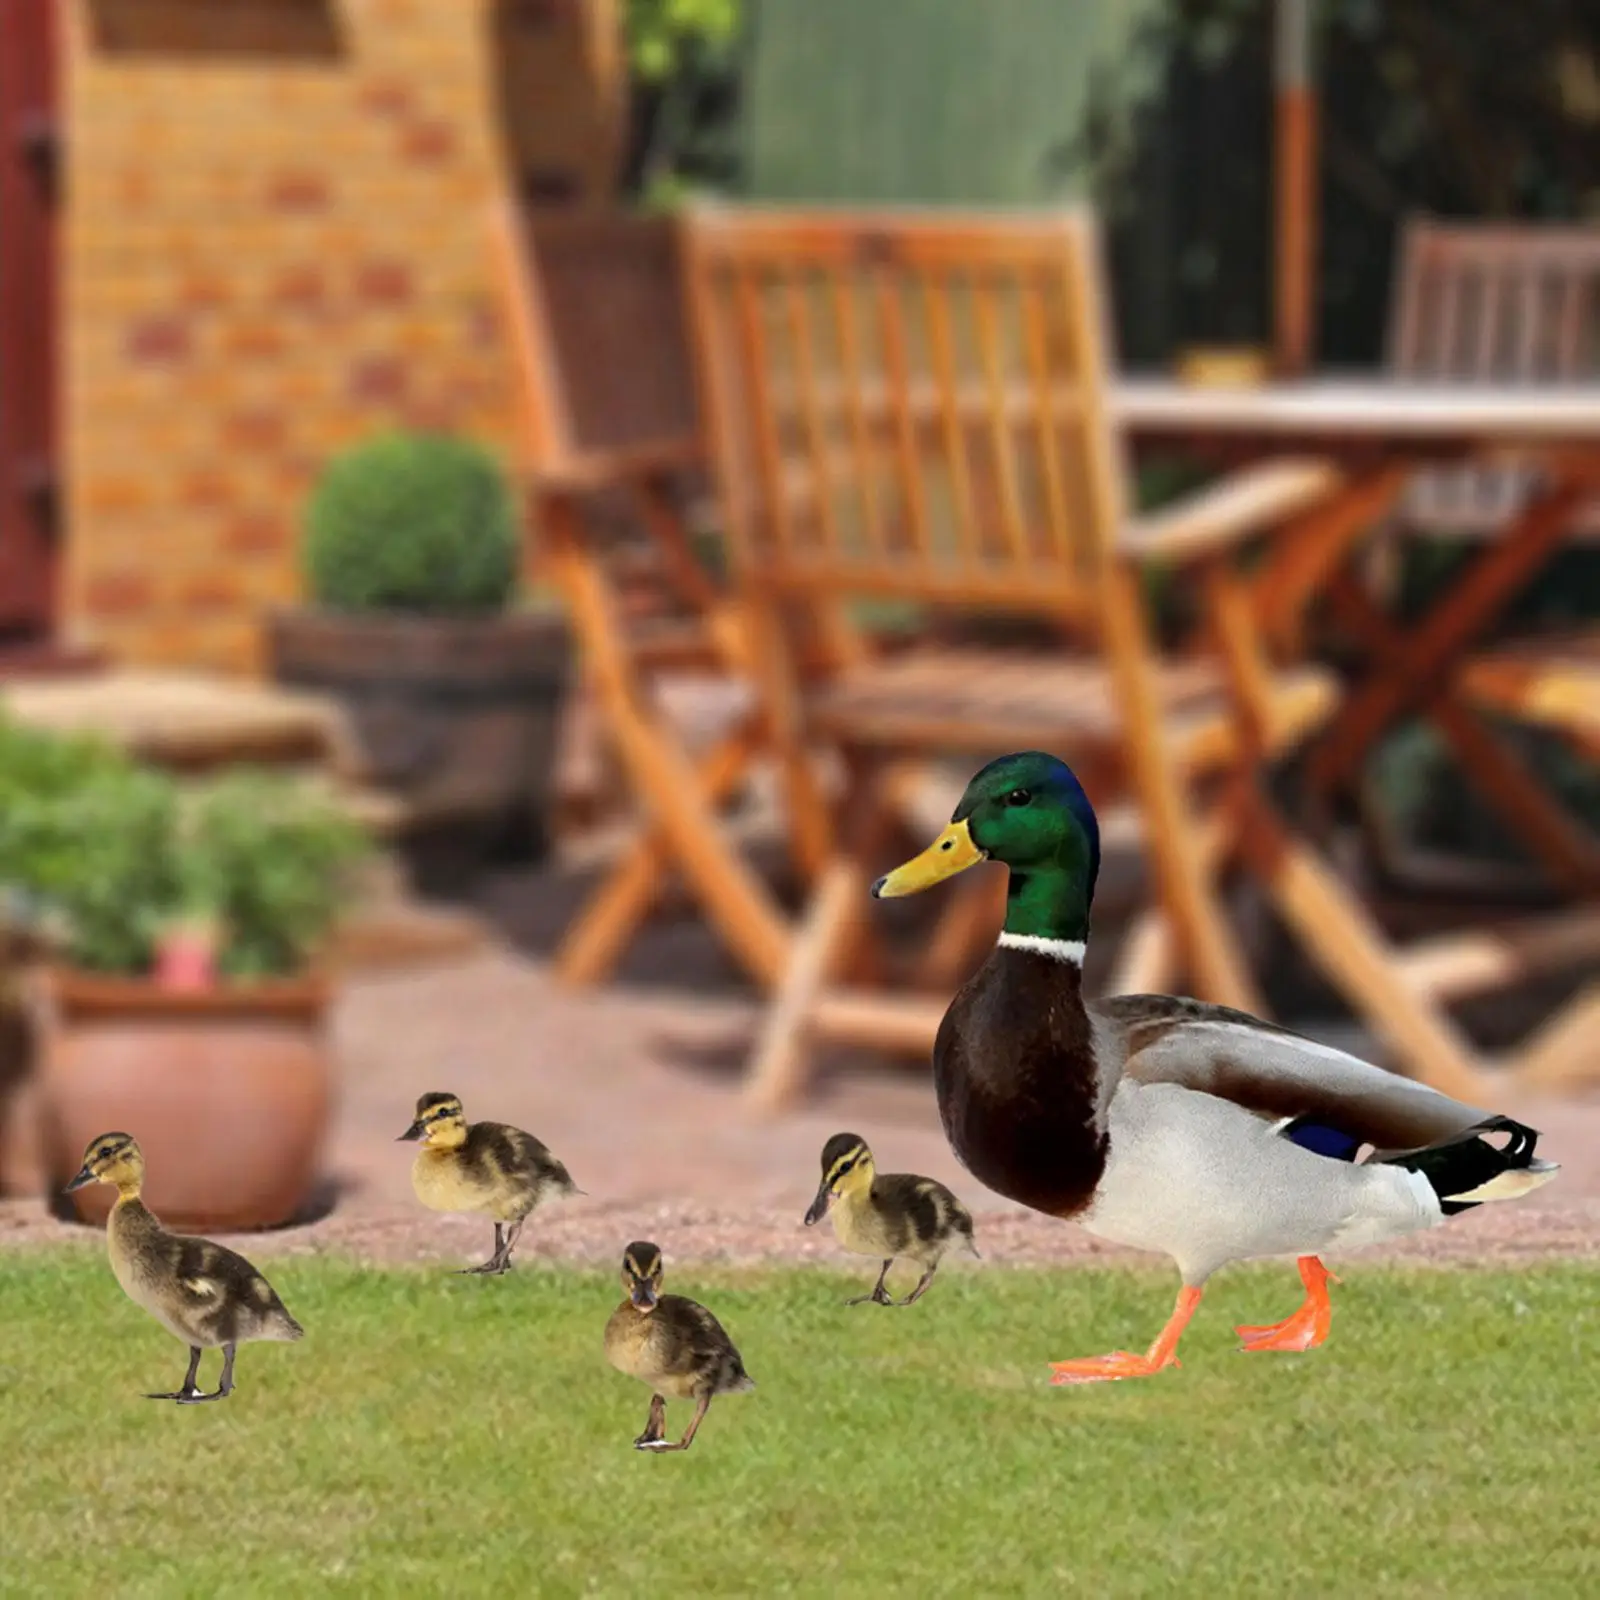 

5x Duck Animal Statue Flat Duck Shaped Yard Stake Lawn Stakes Decorative Garden Ornaments for Pathway Outdoor Backyard Courtyard